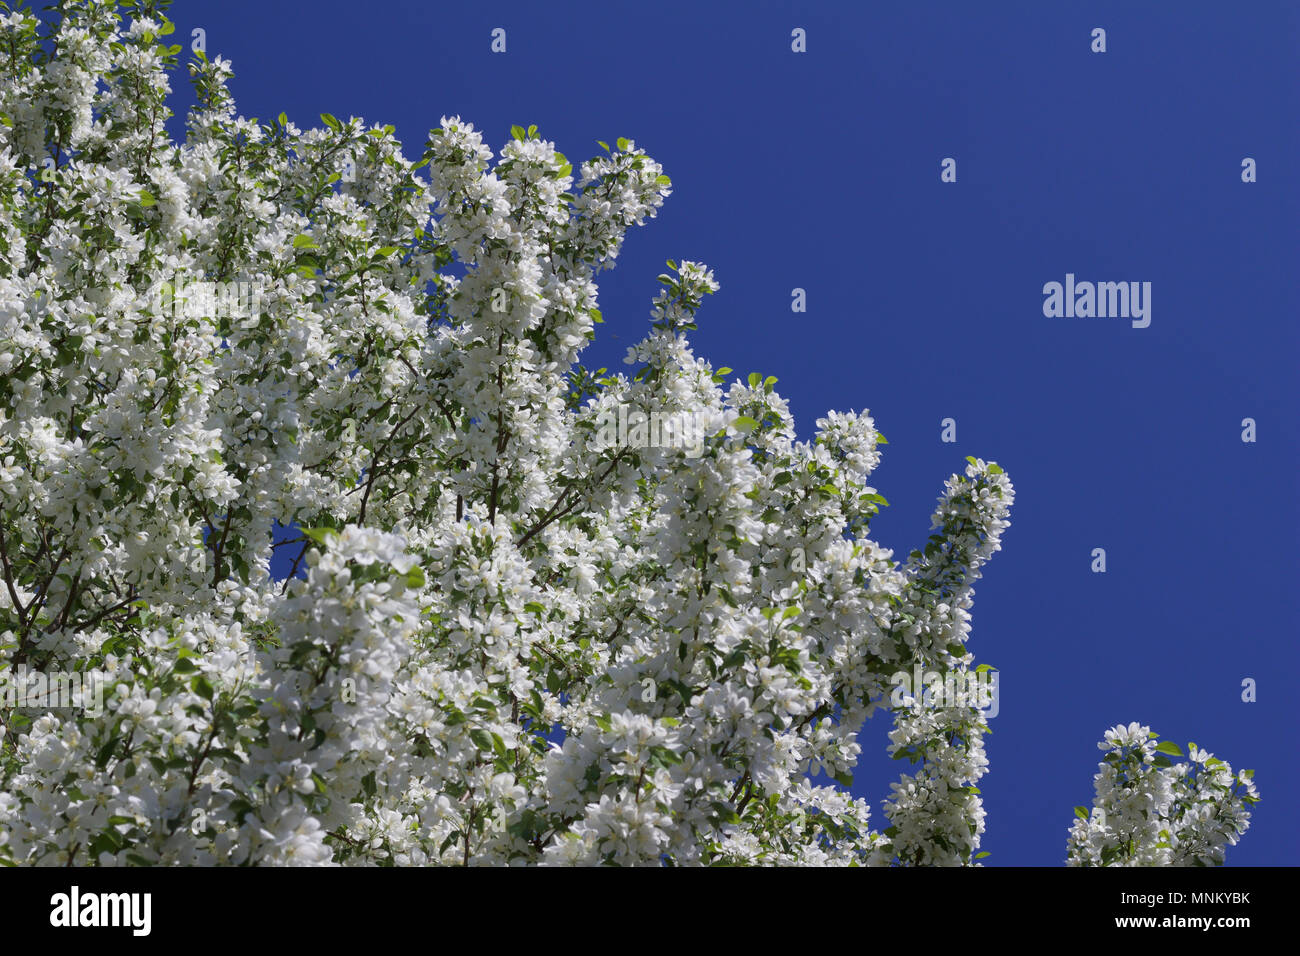 Bright snow white blossoms on a spring blooming ornamental crabapple tree with blue sky background Stock Photo